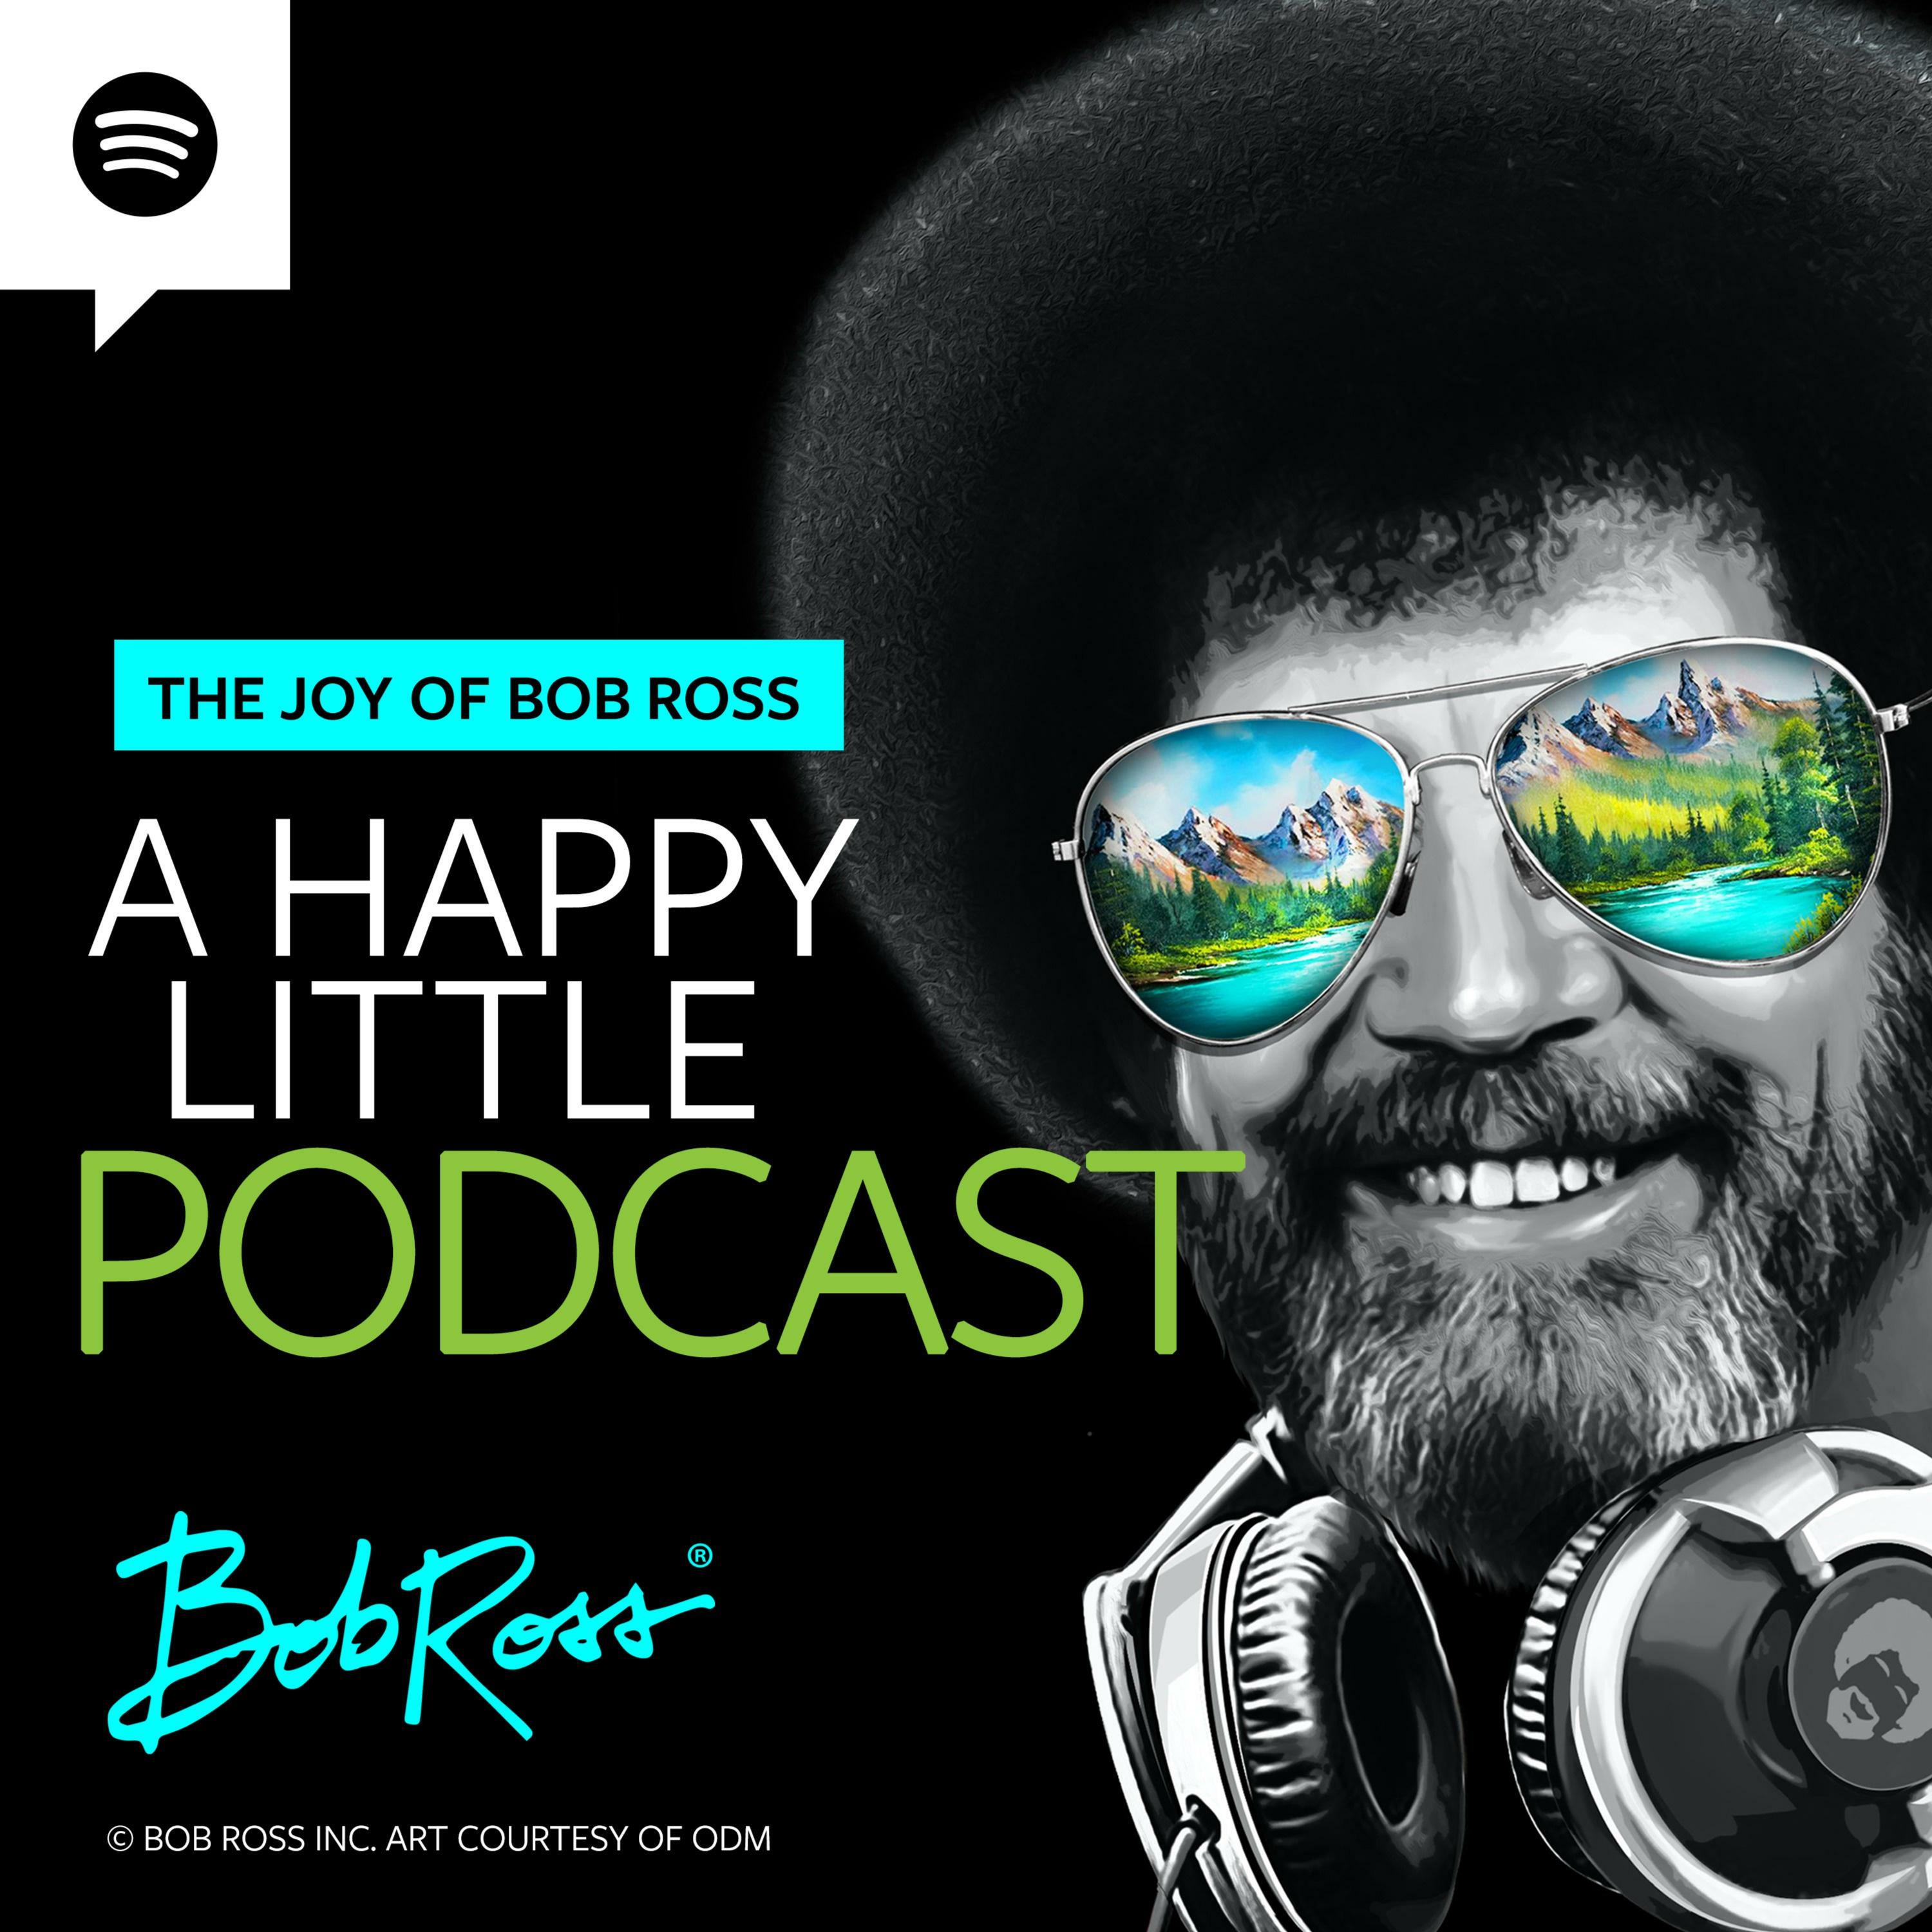 The Joy of Bob Ross - A Happy Little Podcast®